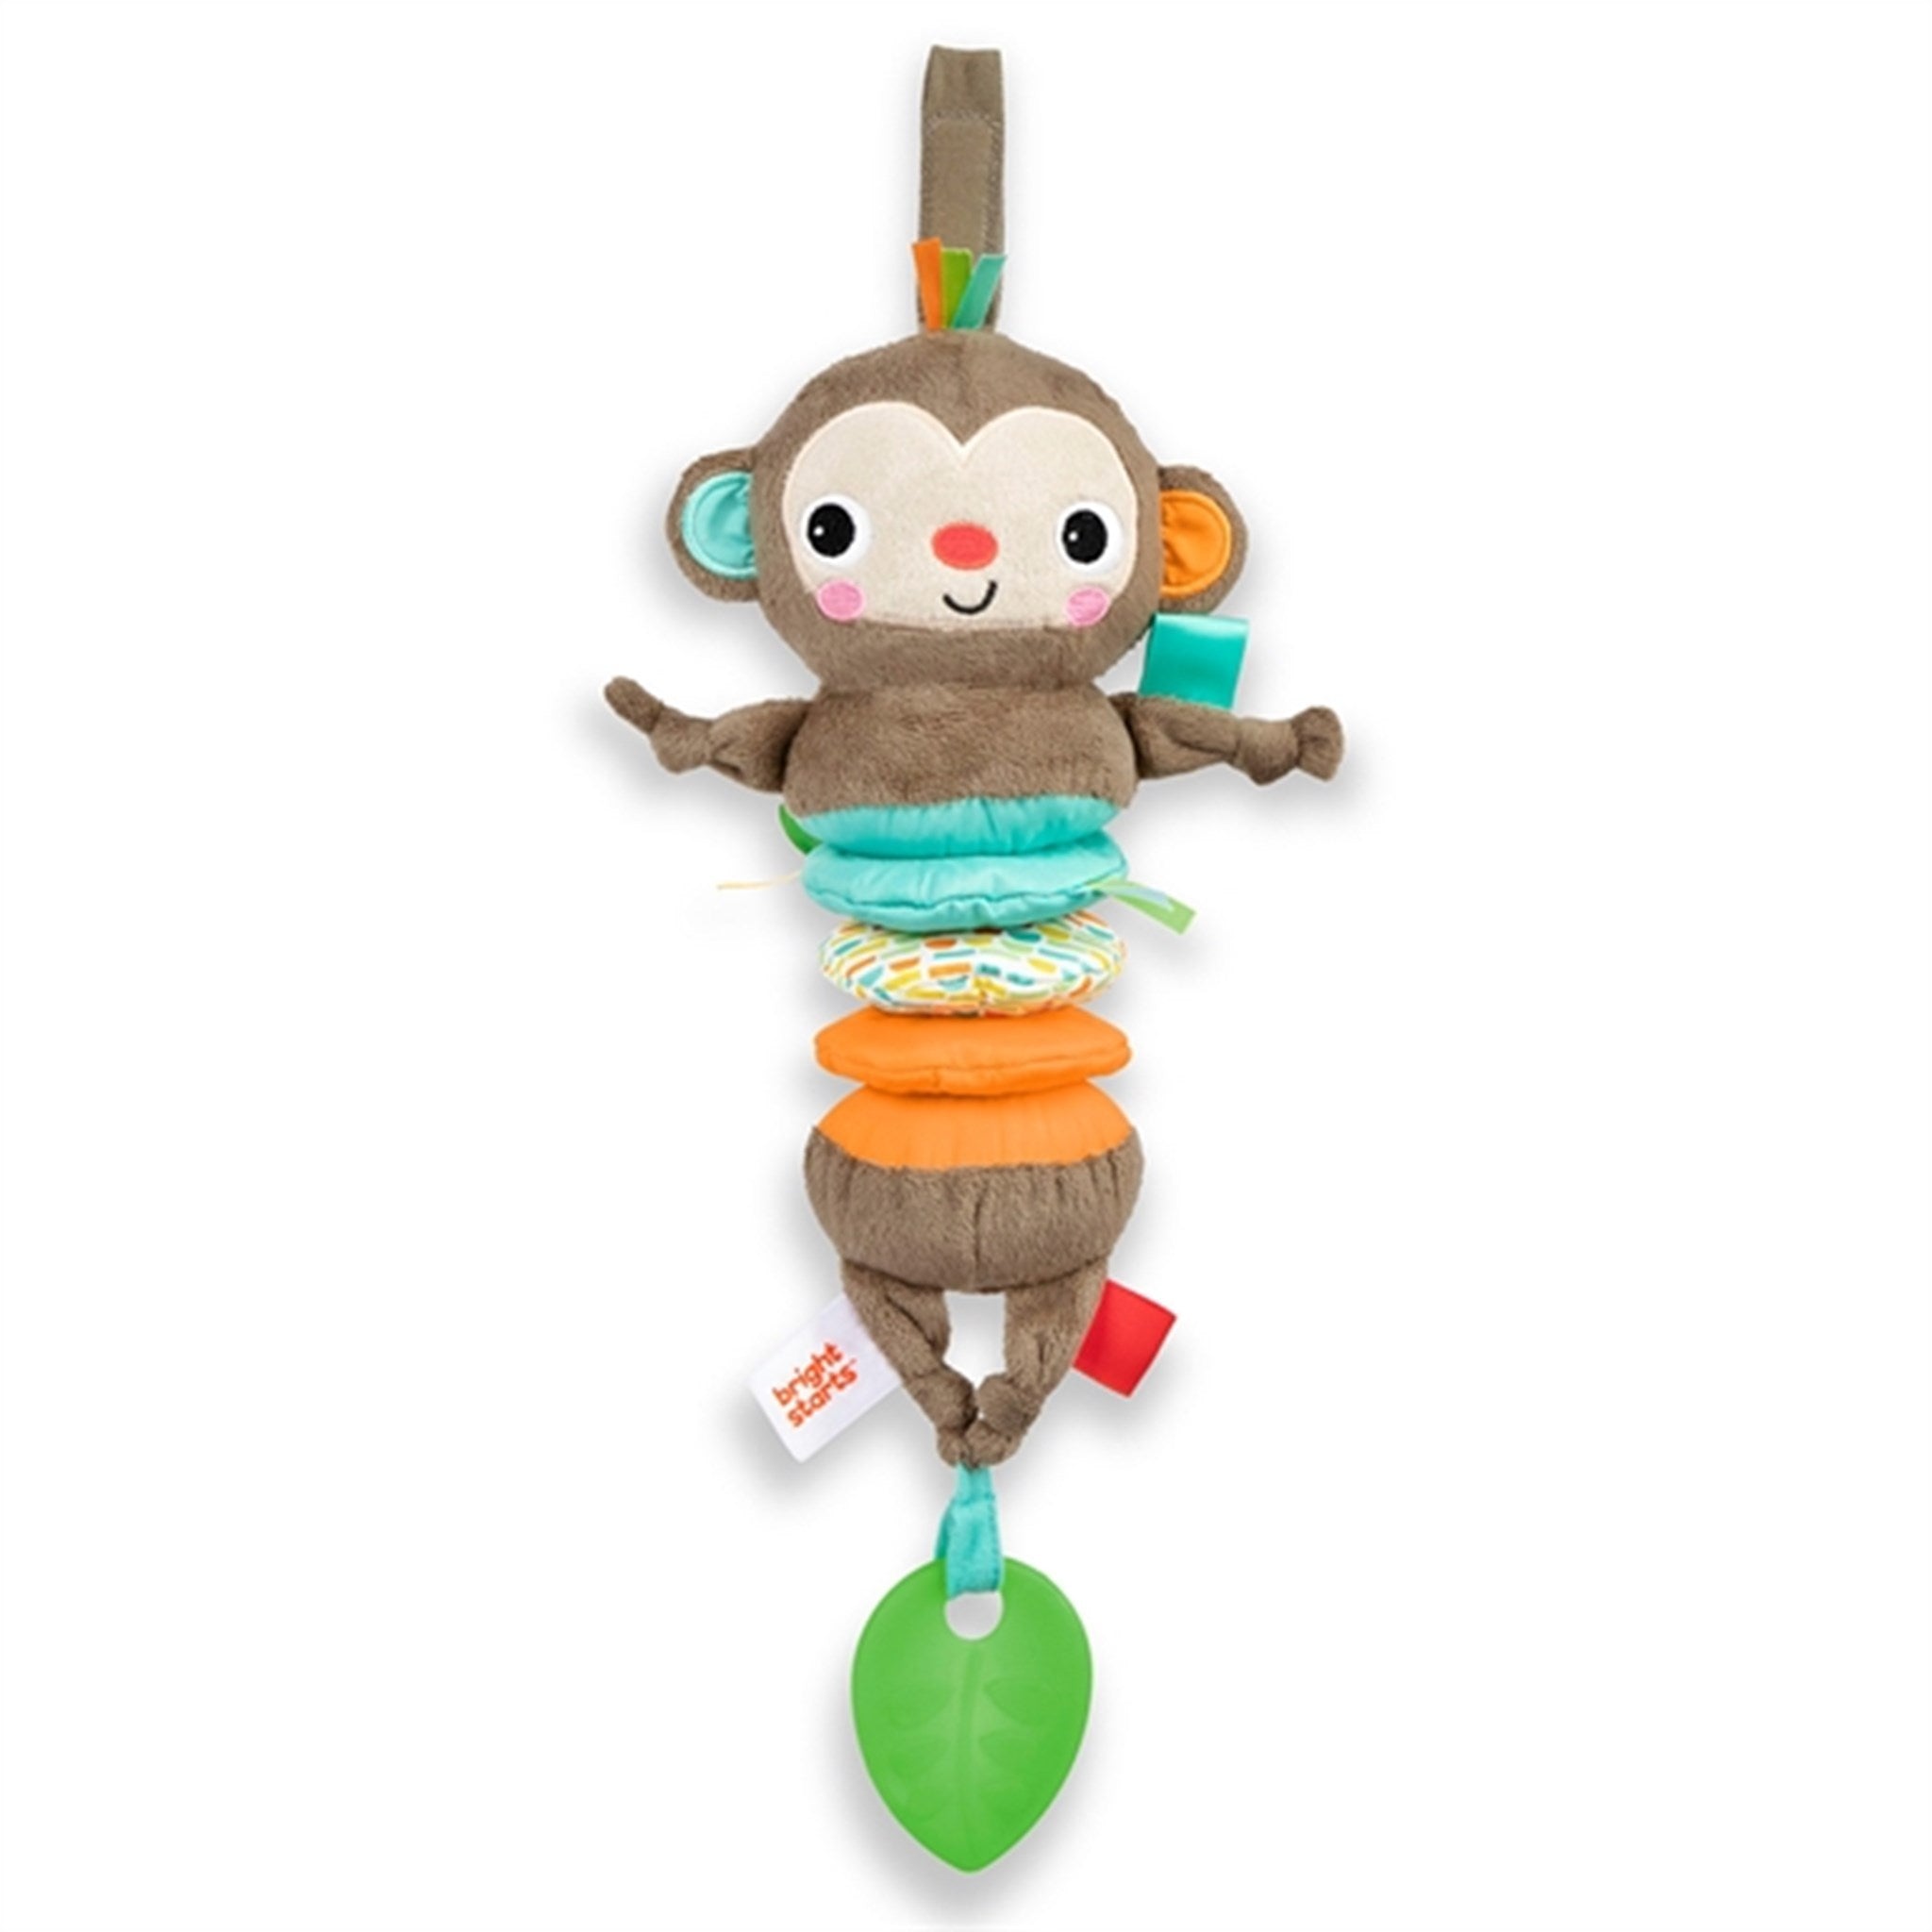 Bright Starts Pull and Play Activity Toy Monkey